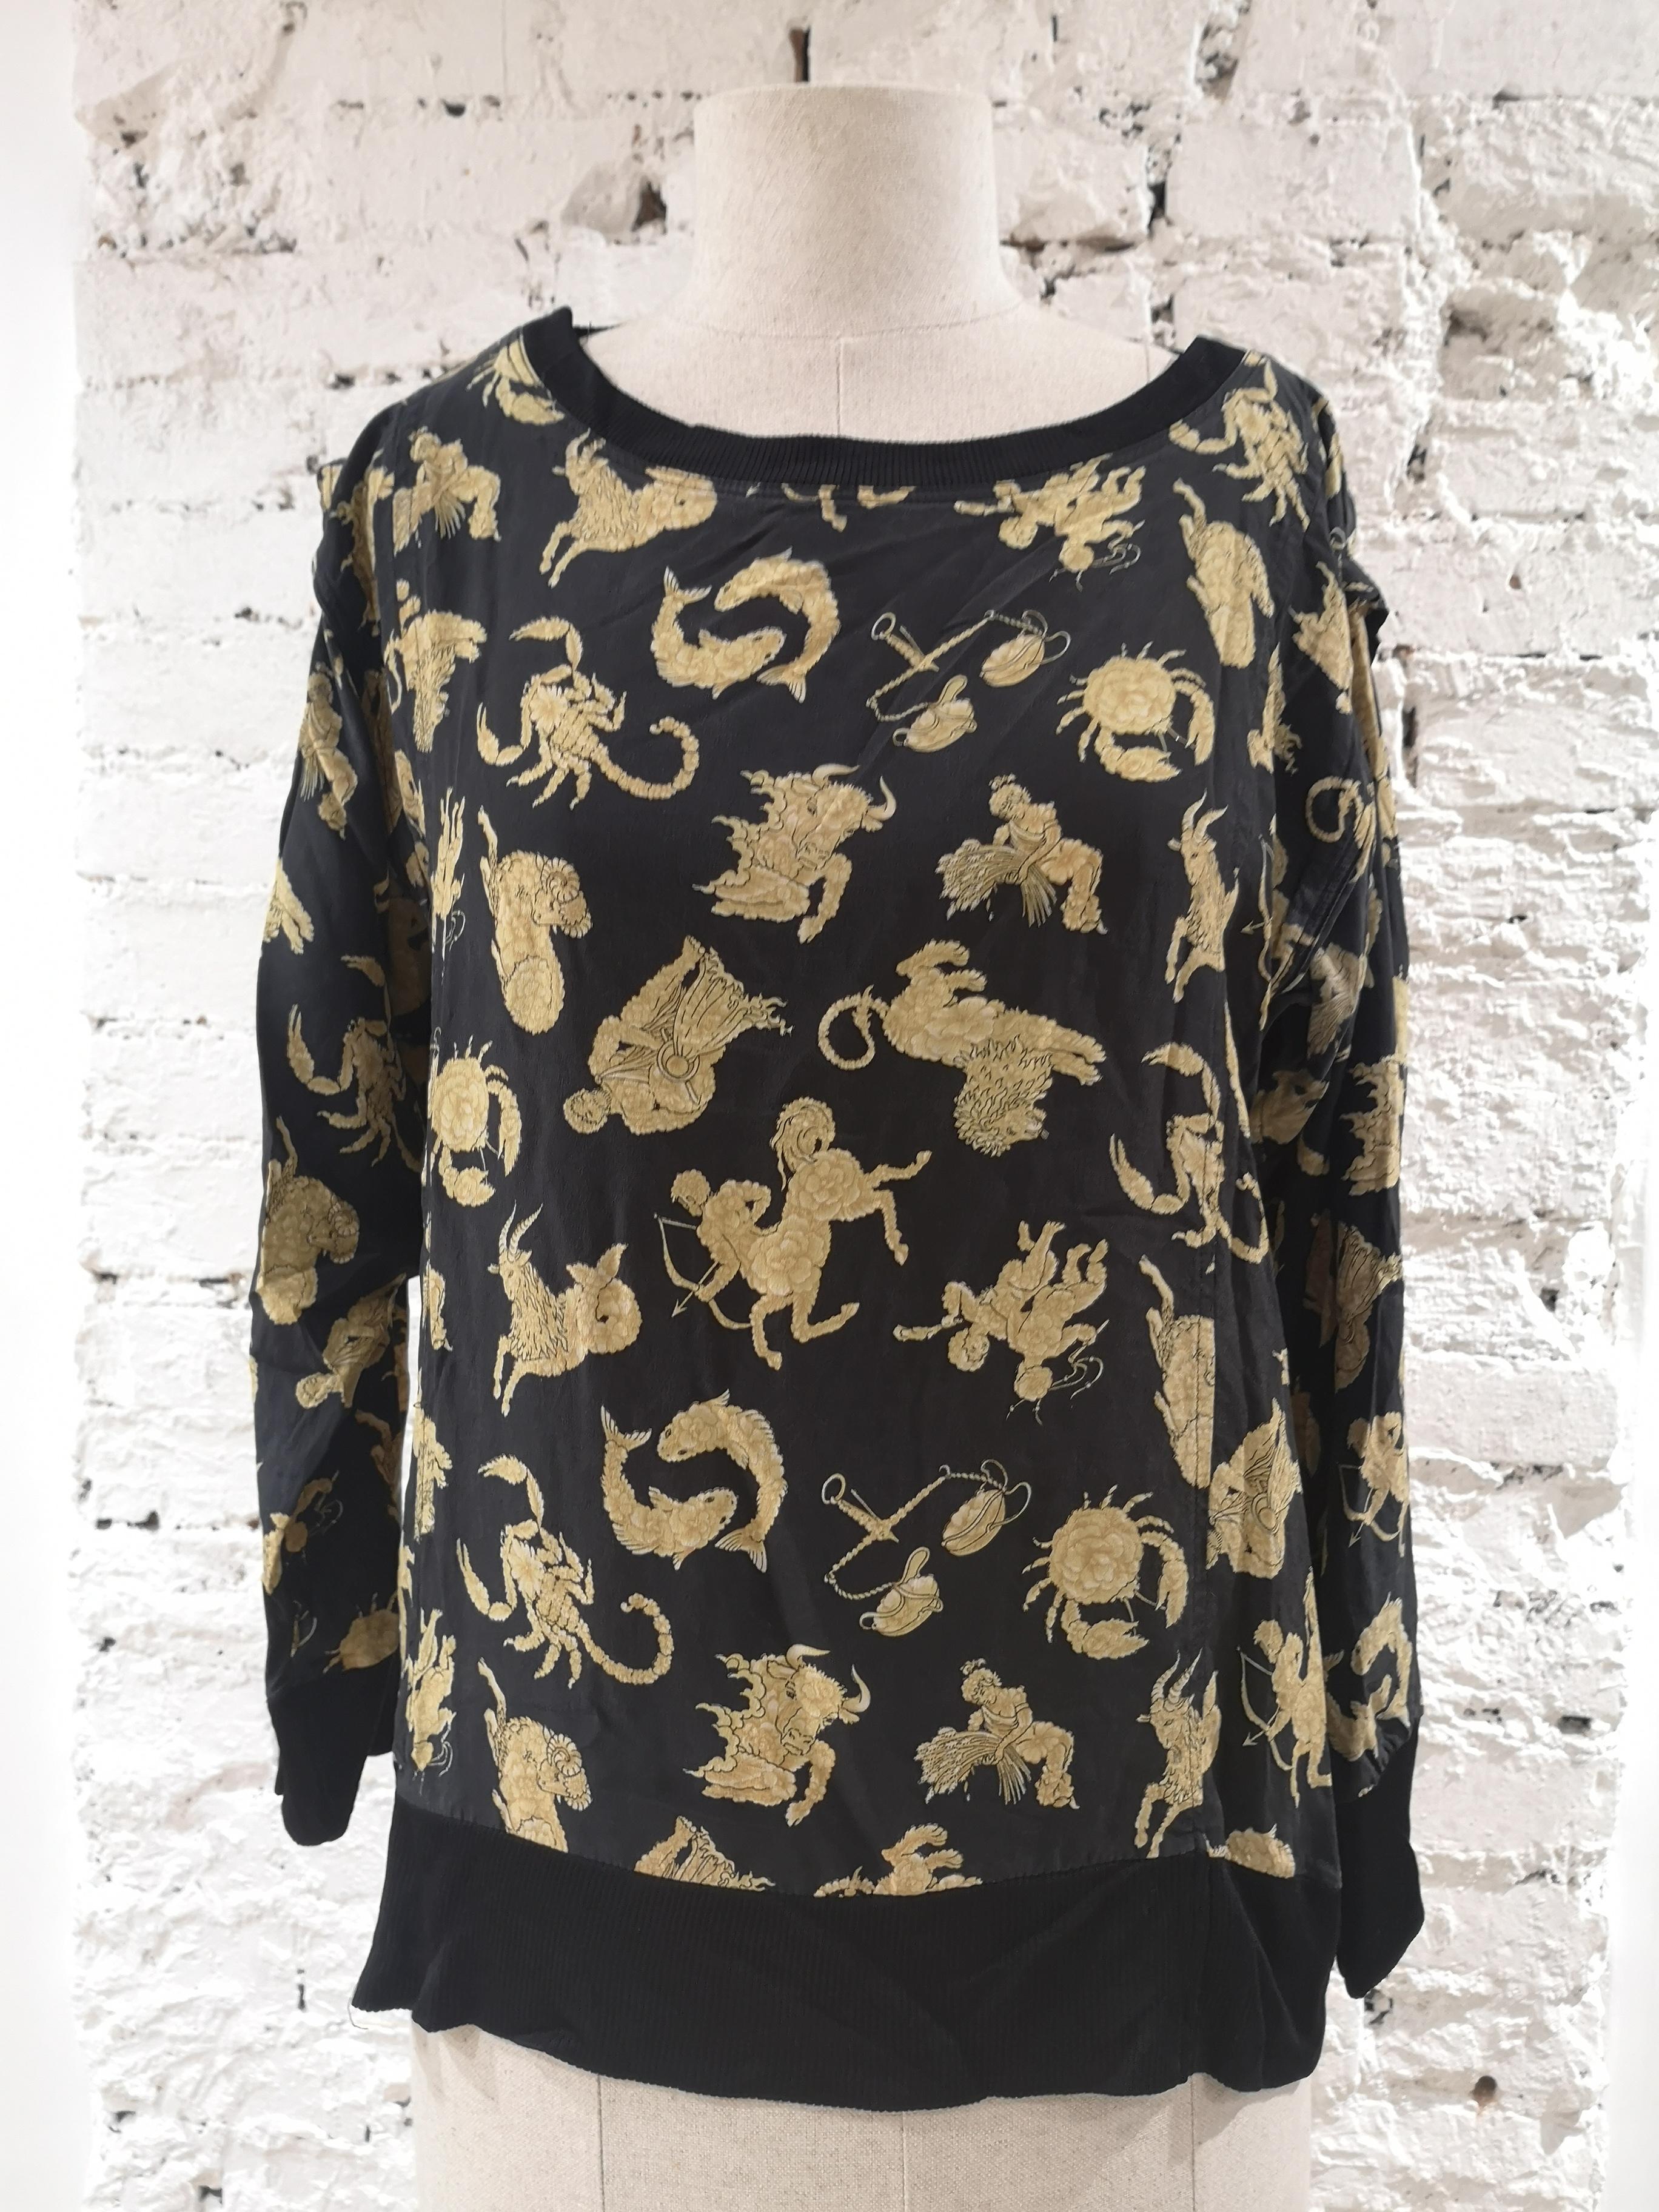 Salvatore Ferragamo black zodiac signs t-shirt
totally made in italy
composition: silk
size 42